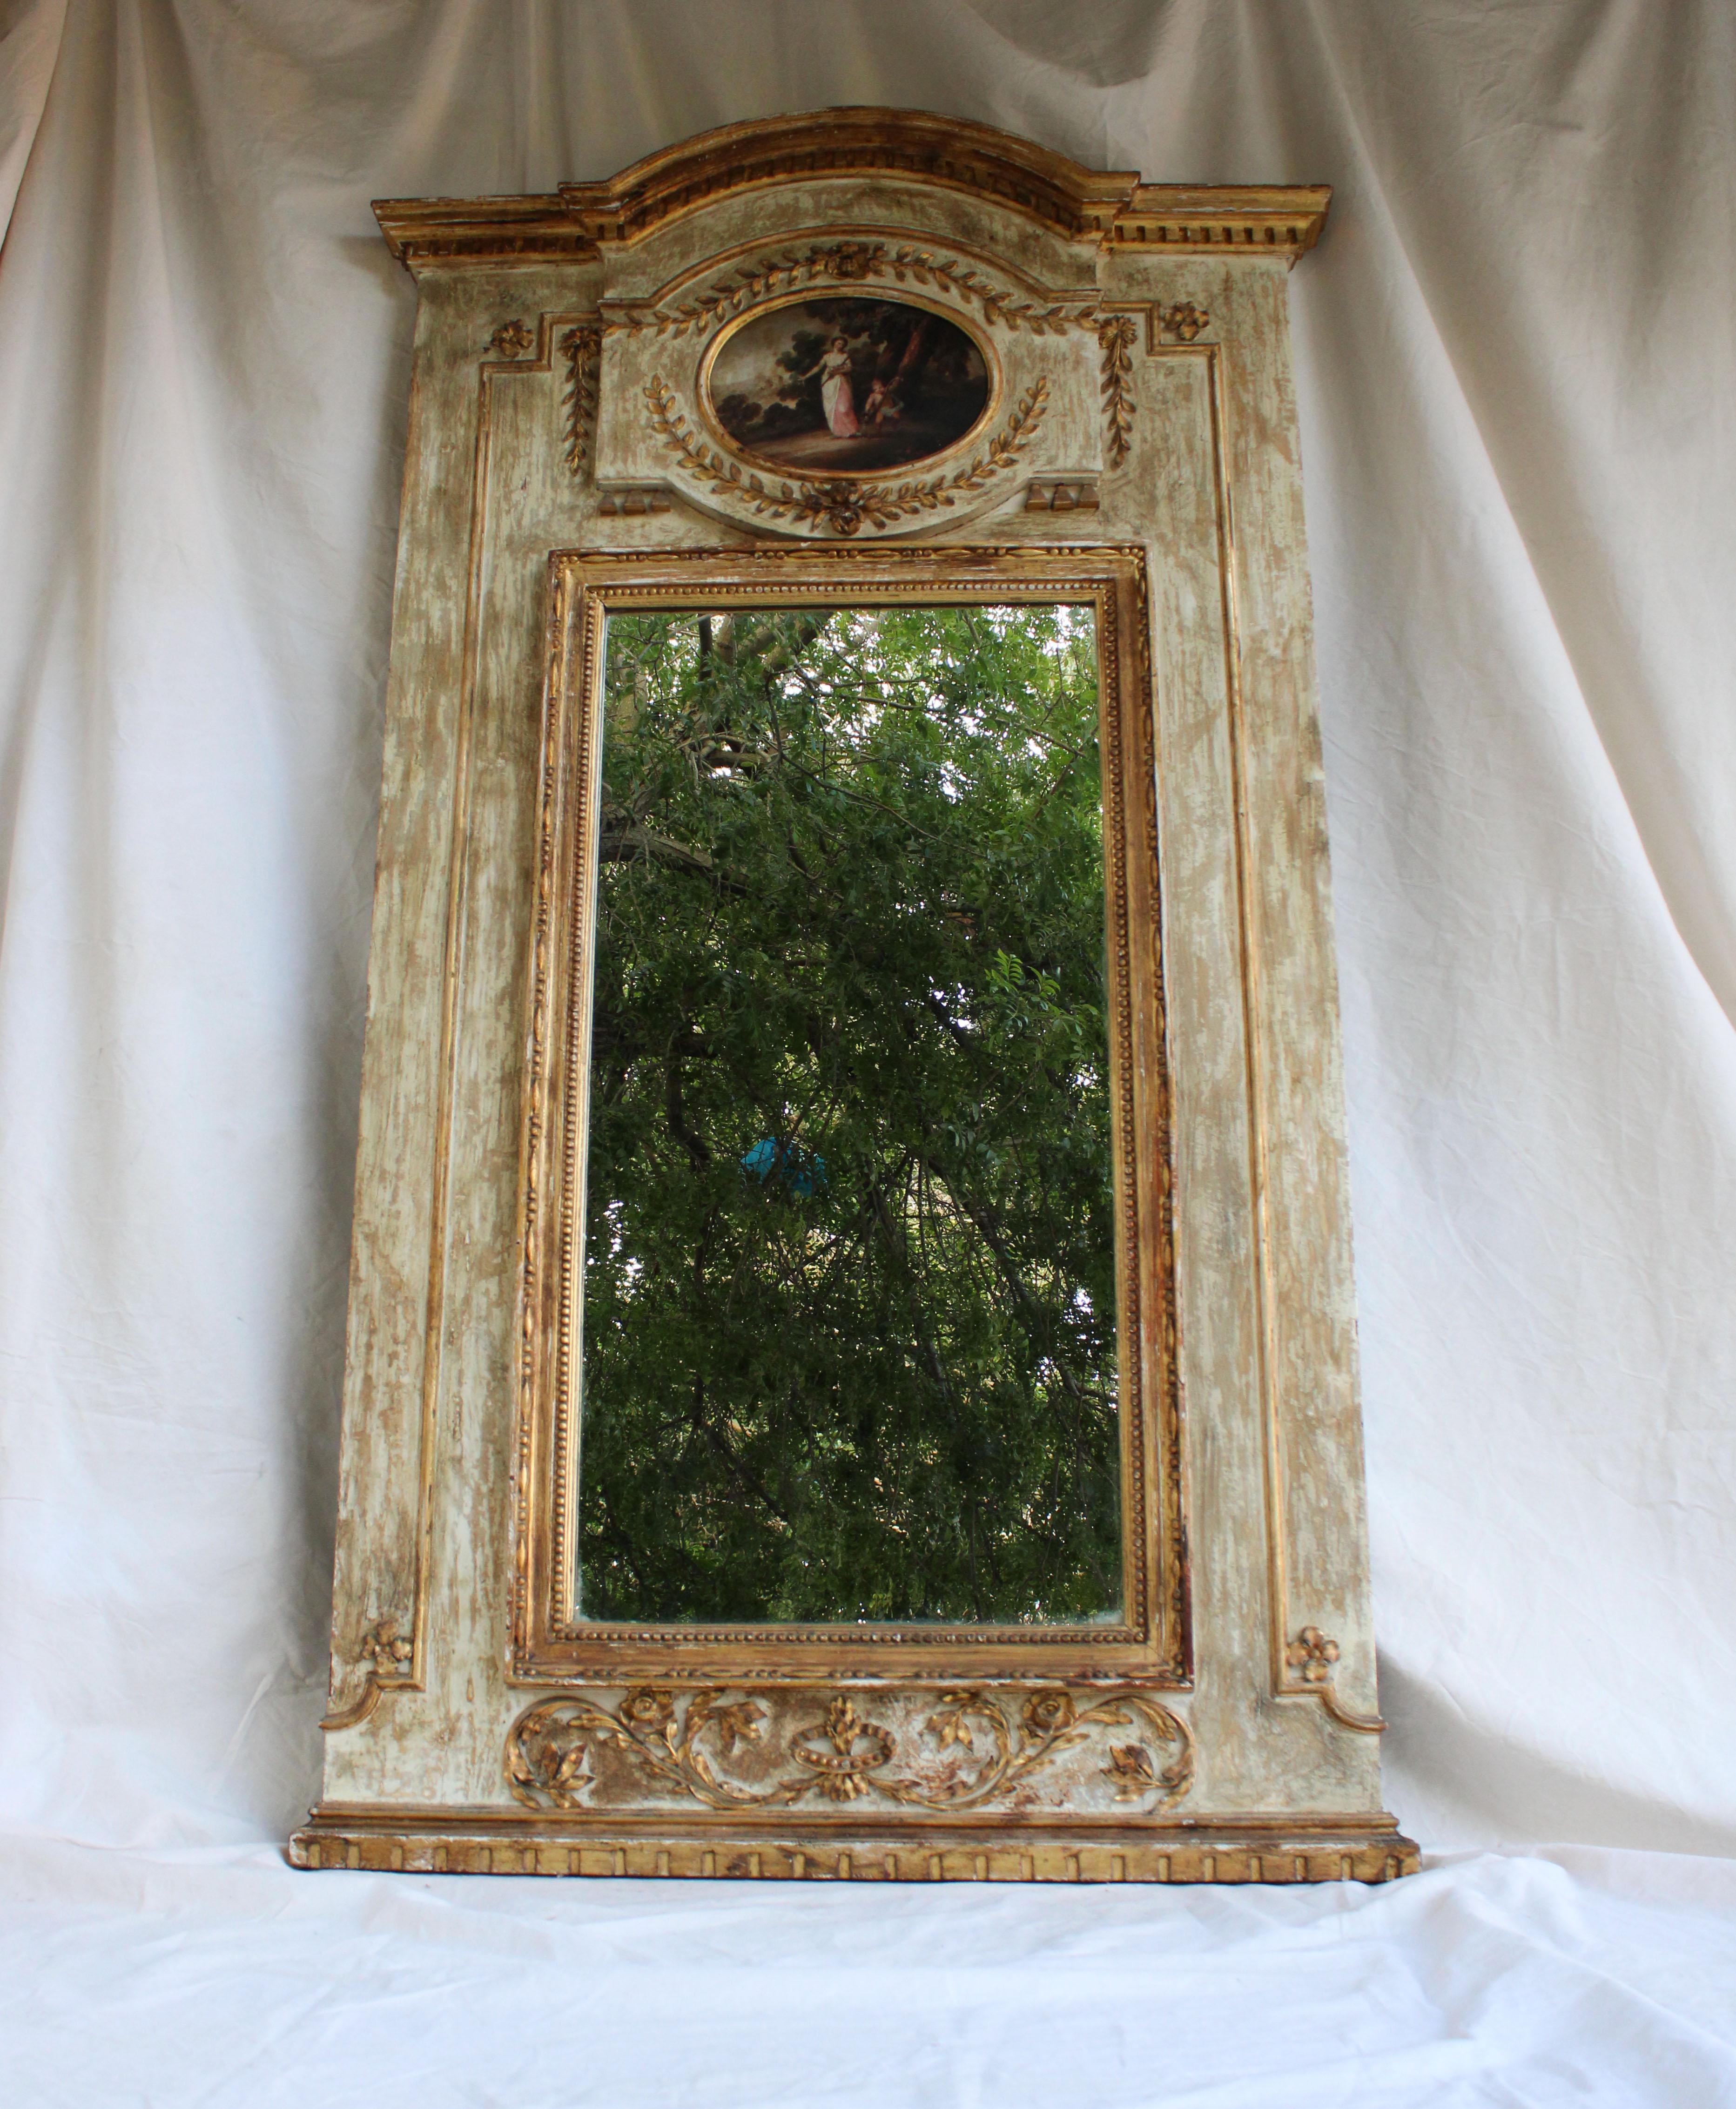 A Neo-Classical Portuguese mirror from the 19th century.

Crafted in the Neo-Classical style, which was popular during the 19th century in Portugal. The Neo-Classical style drew inspiration from classical Greek and Roman art, emphasizing clean